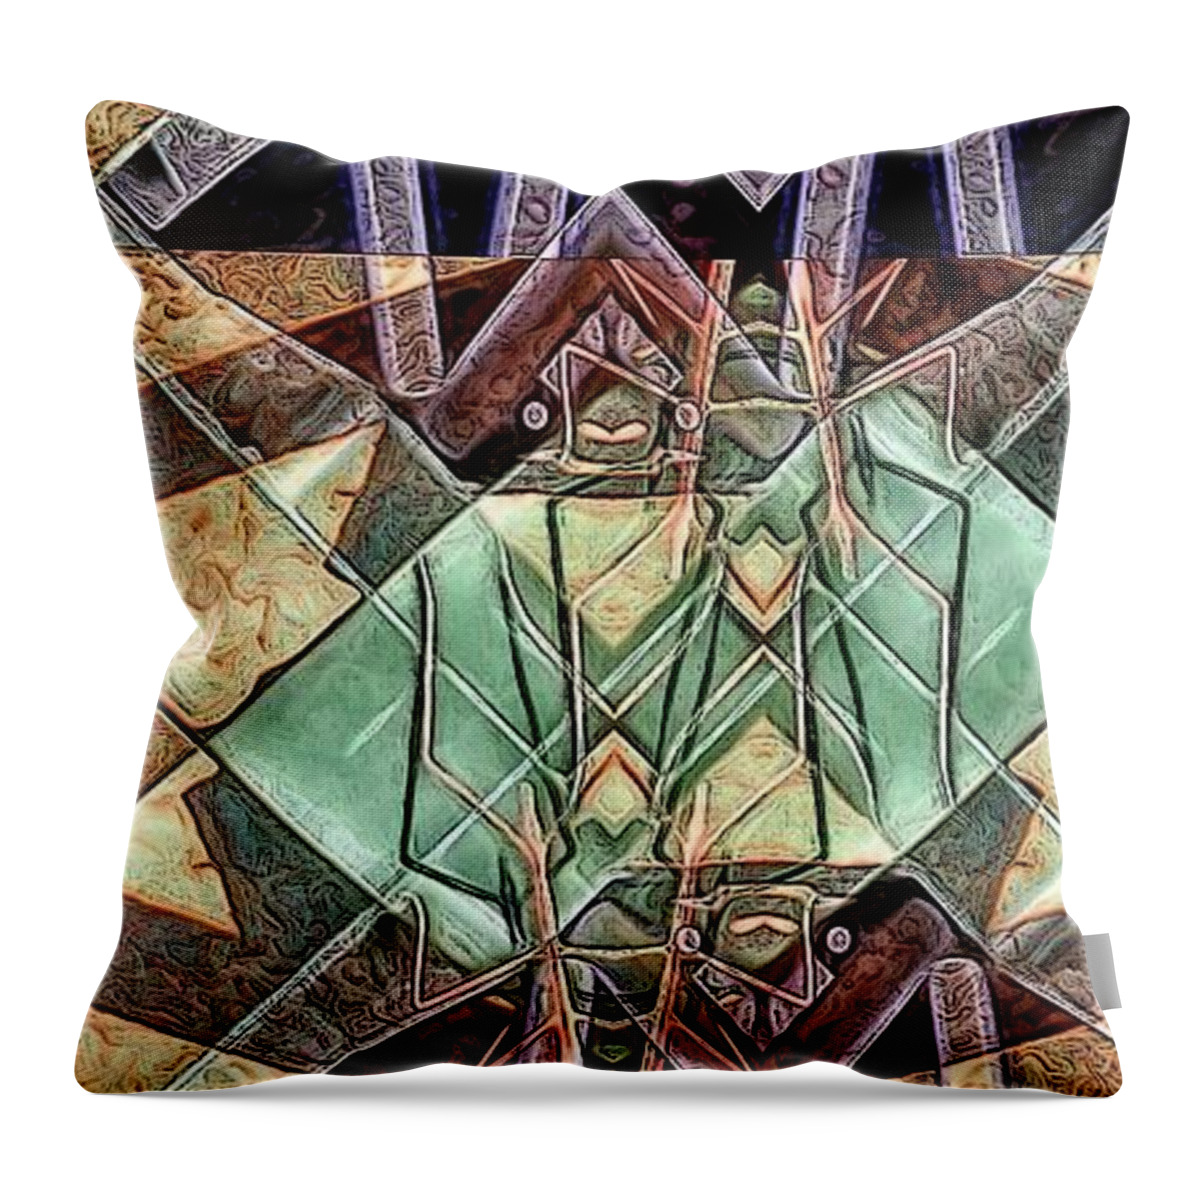 Abstract Throw Pillow featuring the digital art Phasmids by Ron Bissett